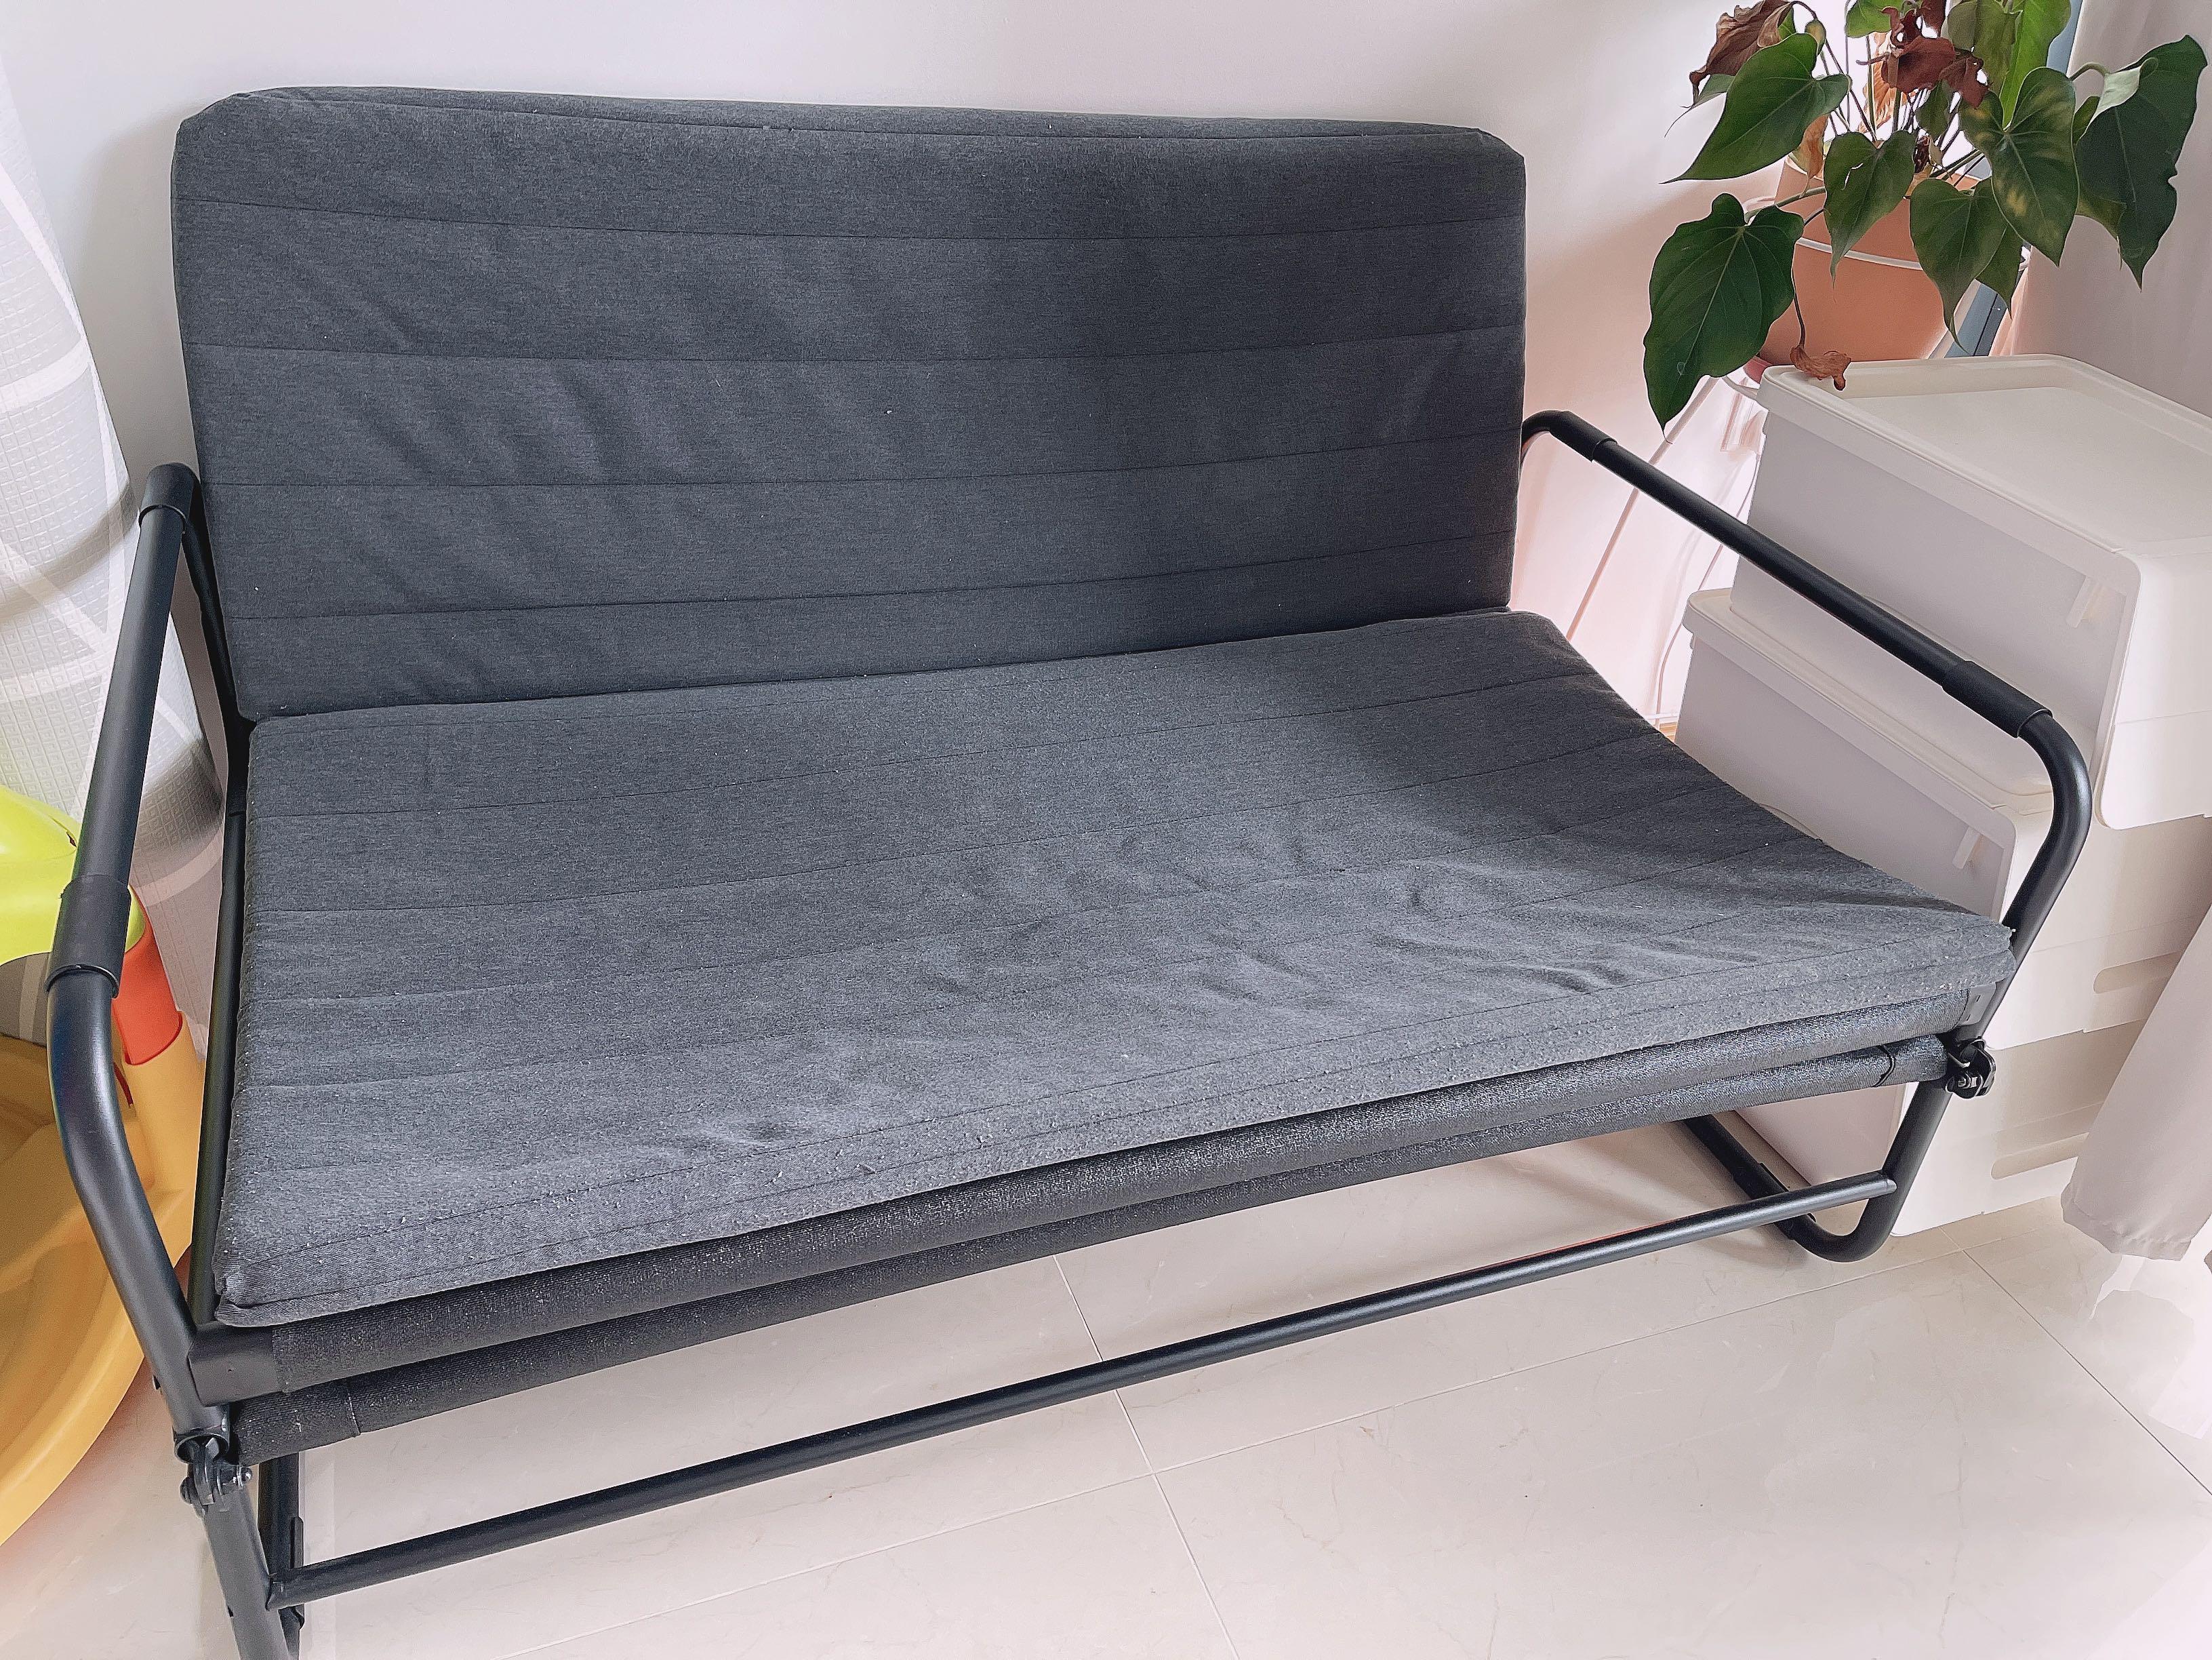 Ikea Hammarn Sofa Bed Furniture Home Living Furniture Bed Frames Mattresses On Carousell